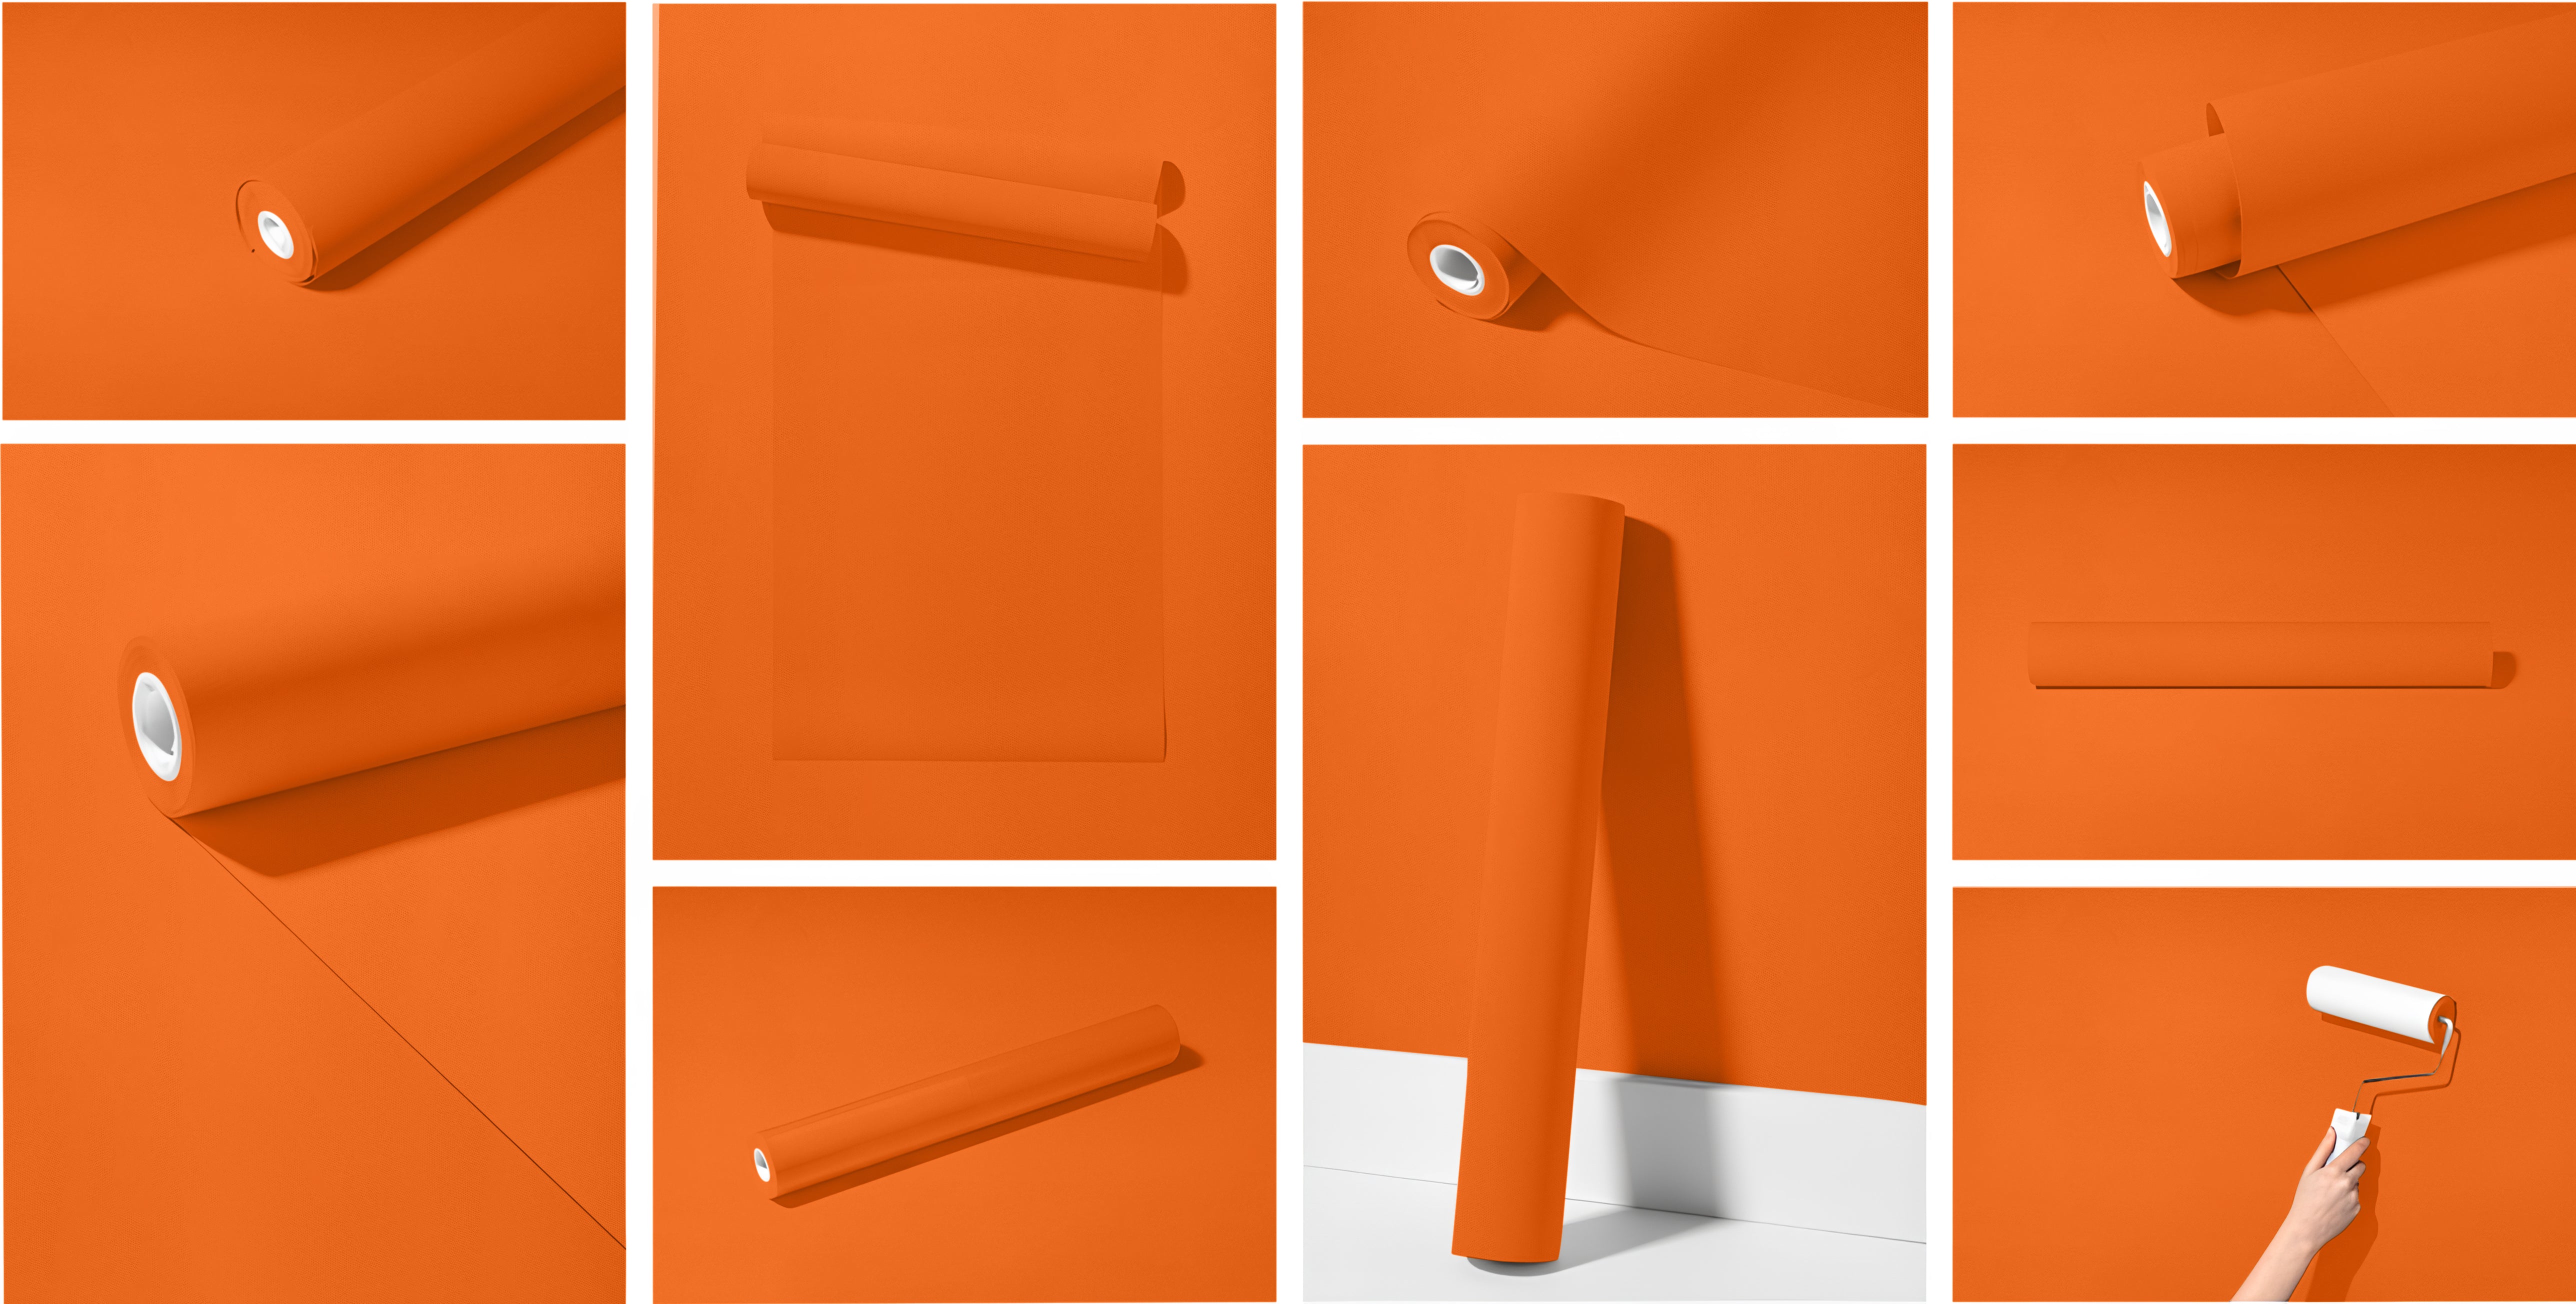 Peel & Stick Removable Re-usable Paint - Color RAL 2008 Bright Red Orange - offRAL™ - RALRAW LLC, USA